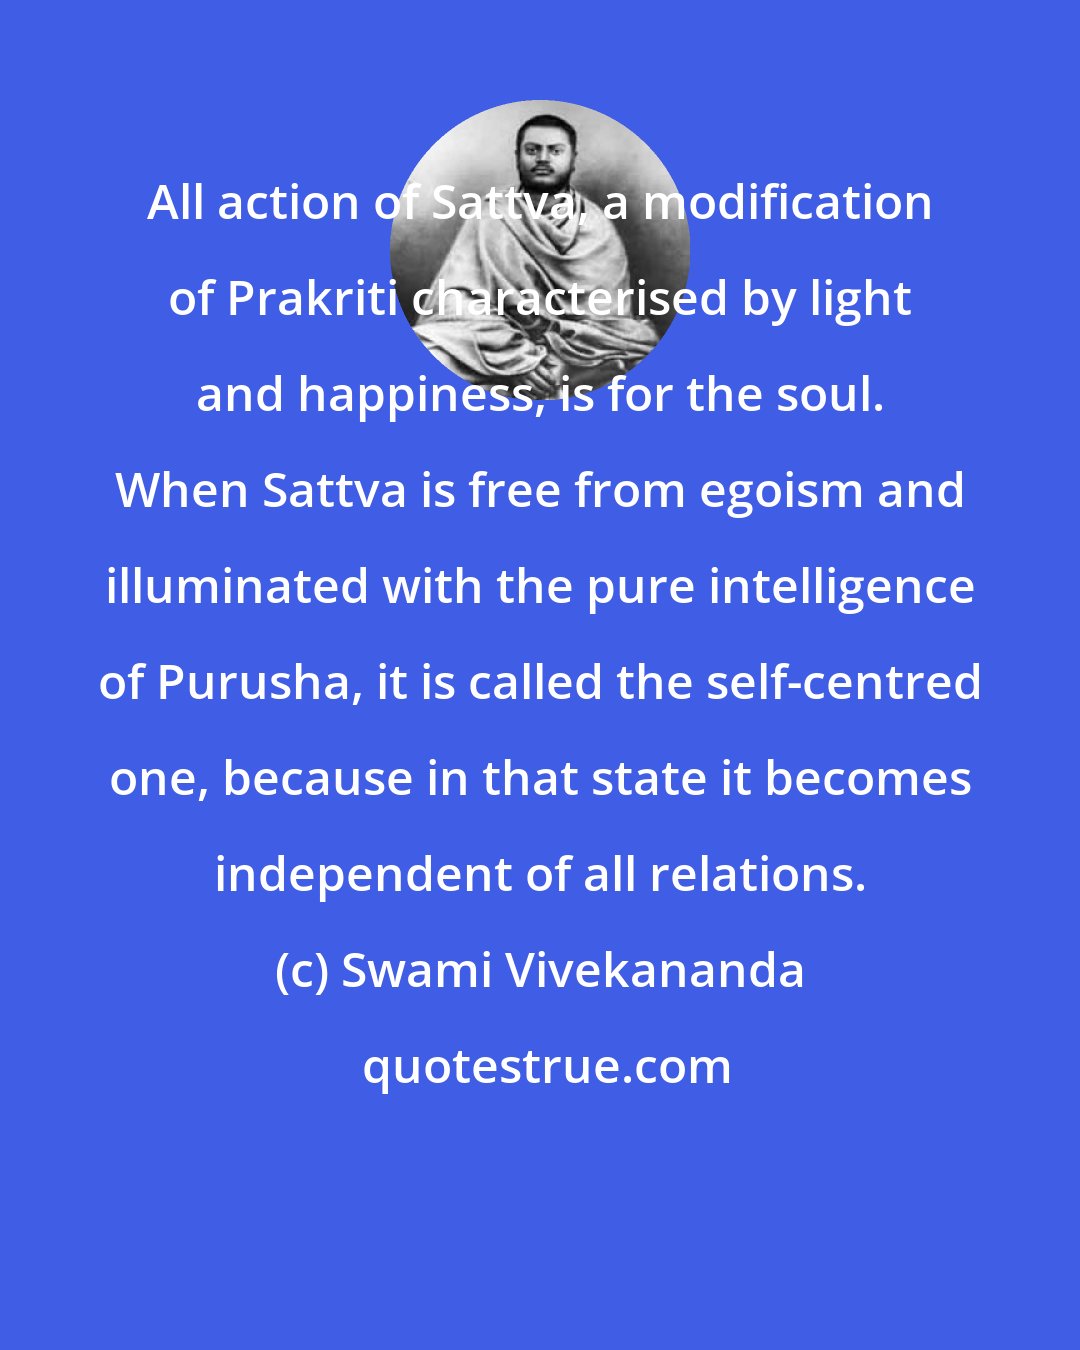 Swami Vivekananda: All action of Sattva, a modification of Prakriti characterised by light and happiness, is for the soul. When Sattva is free from egoism and illuminated with the pure intelligence of Purusha, it is called the self-centred one, because in that state it becomes independent of all relations.